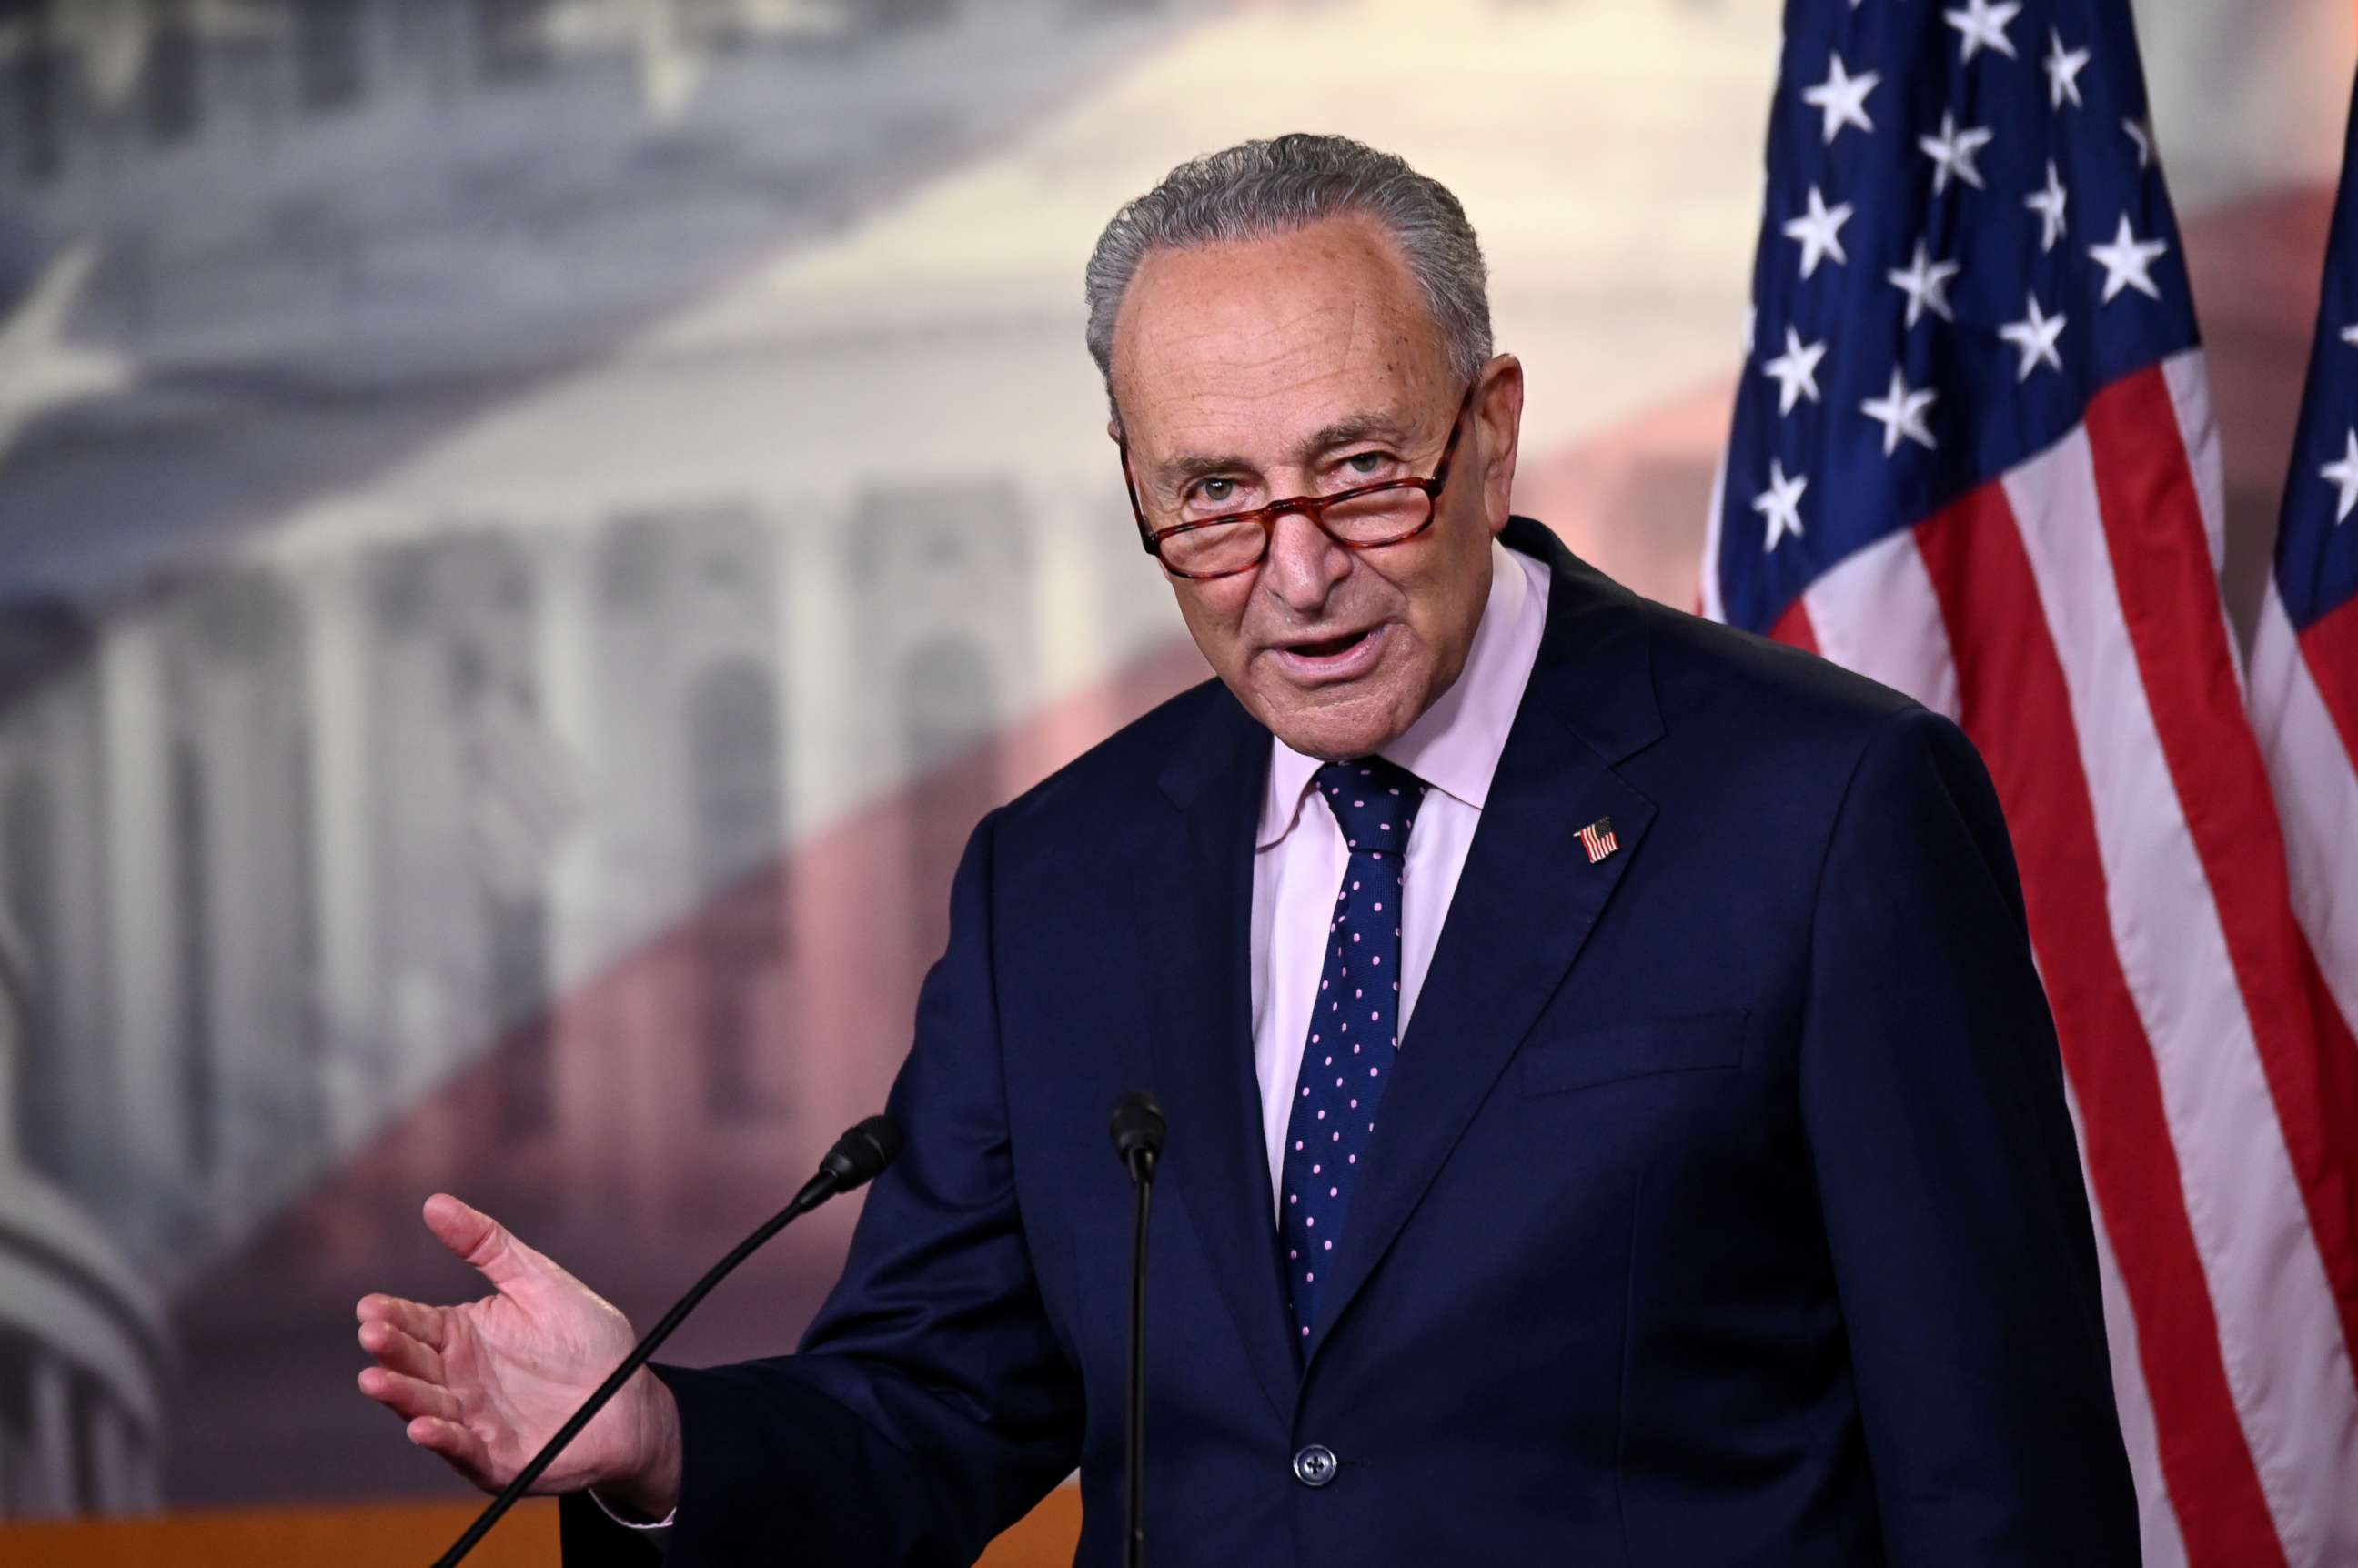 PHOTO: Sen. Minority Leader Chuck Schumer speaks at a news conference with reporters at the Capitol, in Washington, July 23, 2020.